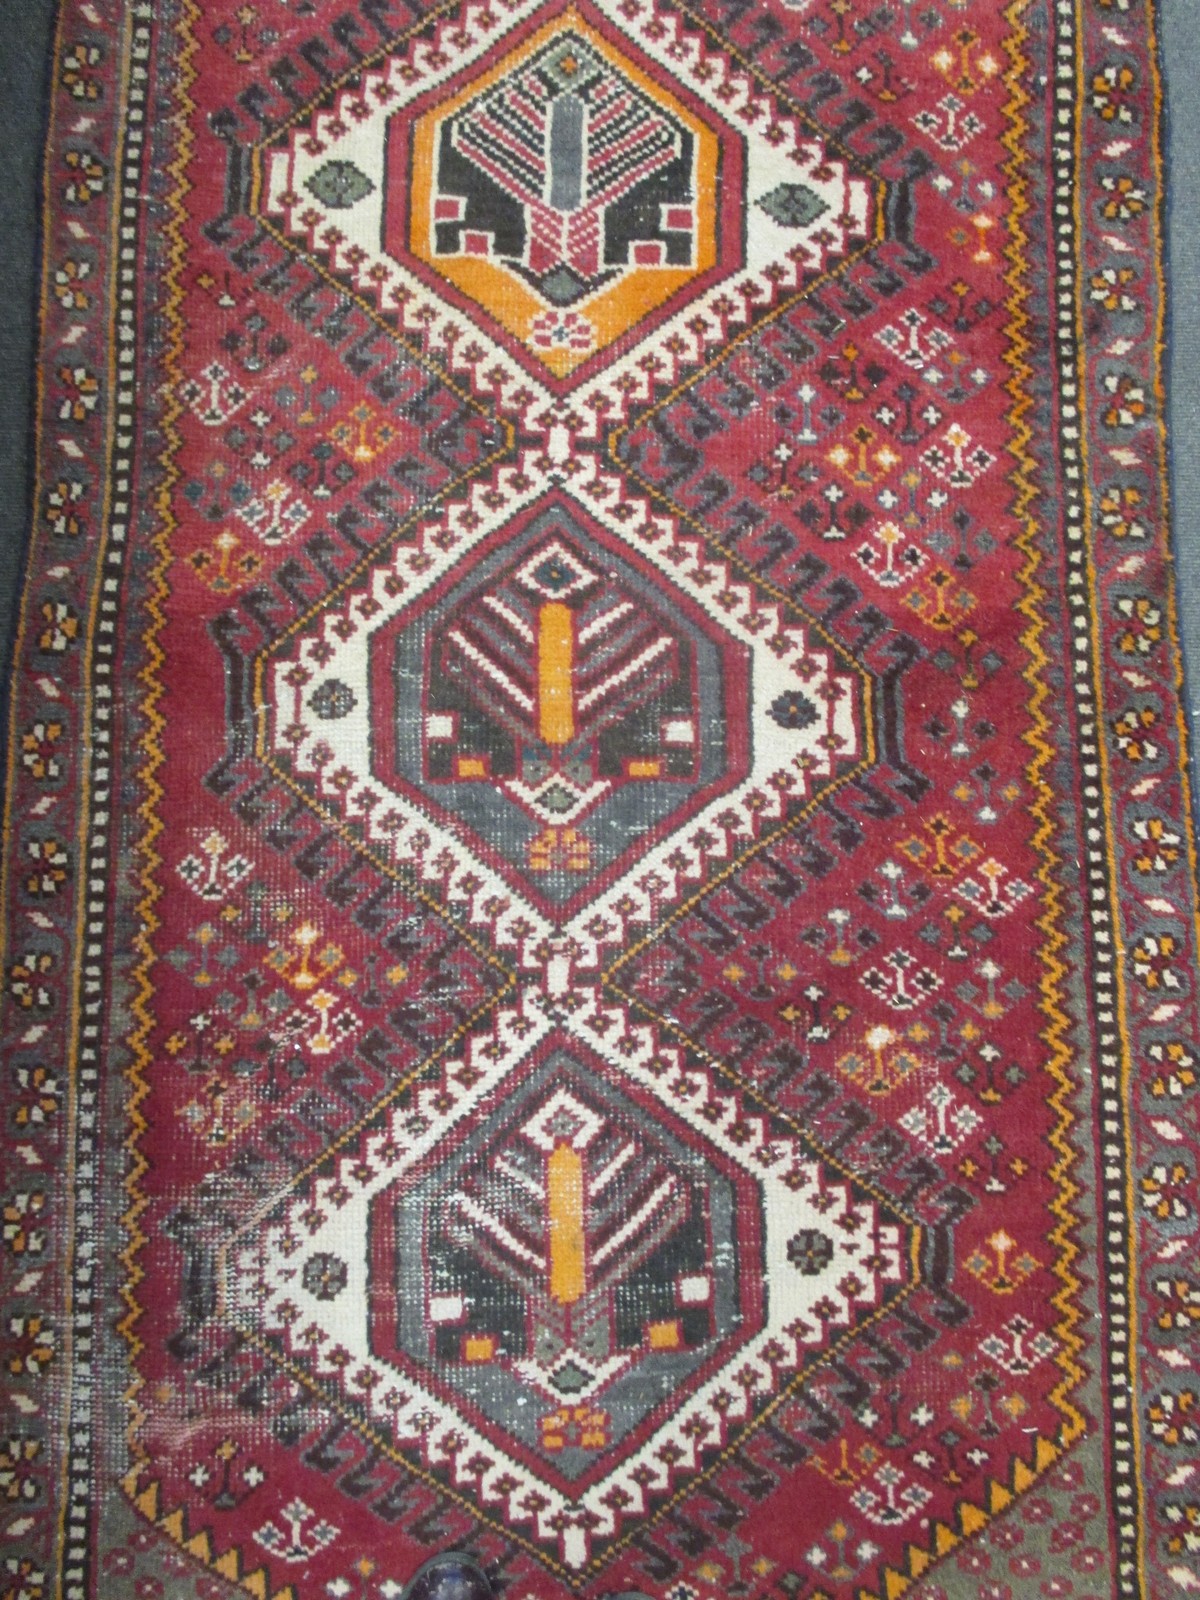 A Turkish runner on a red ground with a floral border, 300 x 95cm